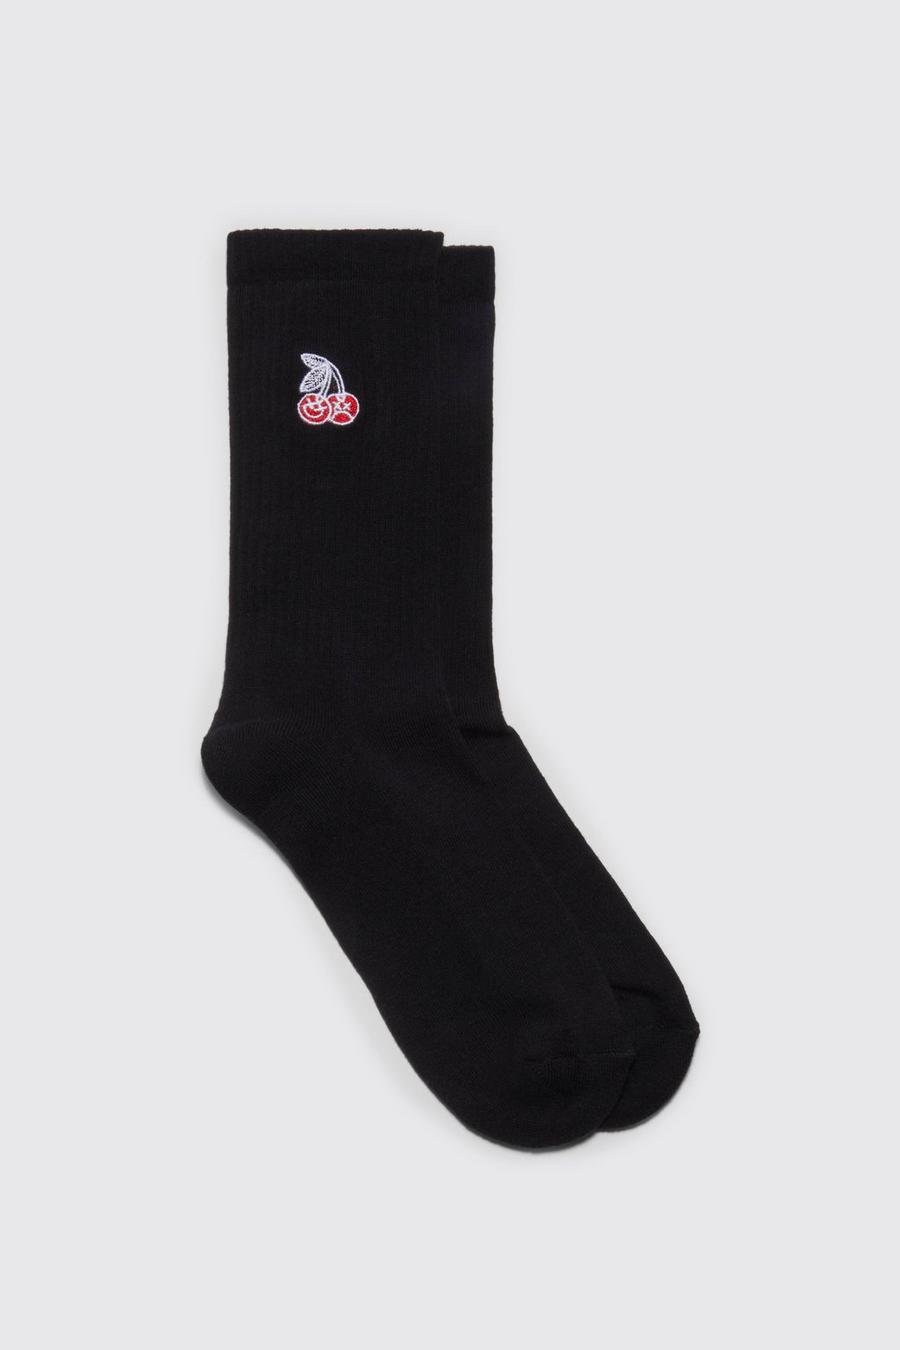 Cherry Embroidered Sports Socks, Black image number 1